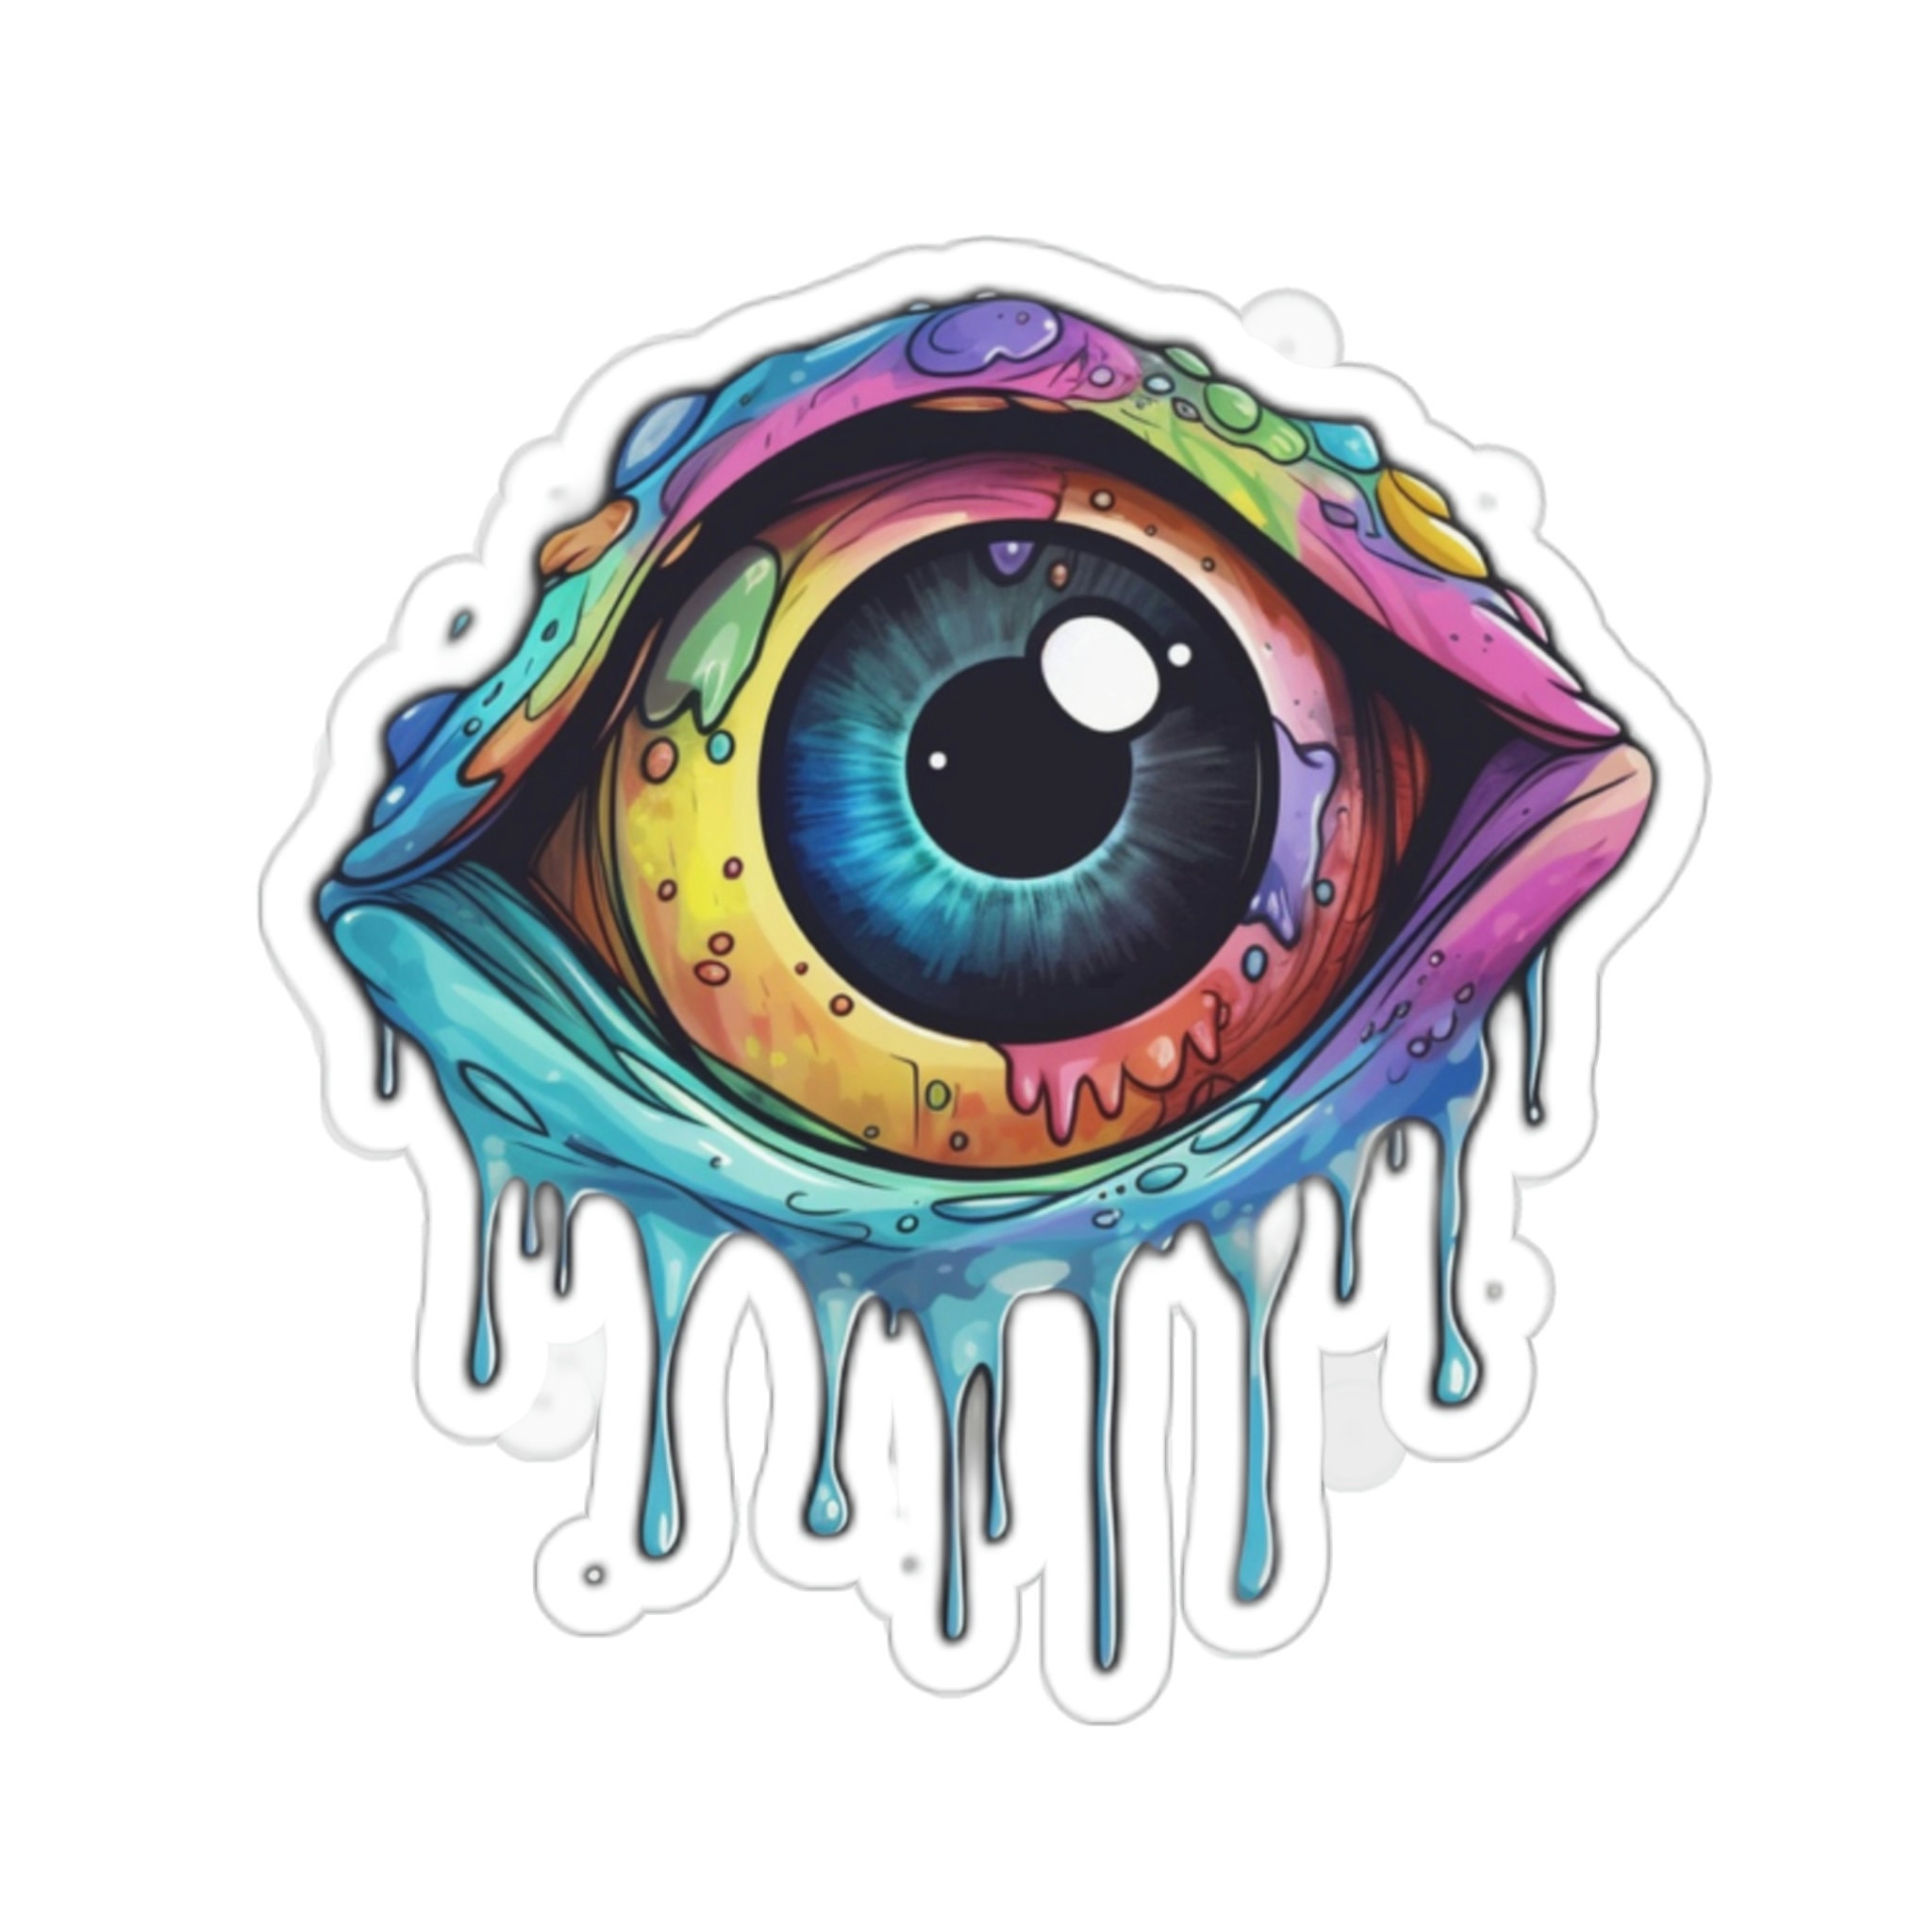 EYEBALL EVERYTHING: Over 1,001 Removable Stickers! 